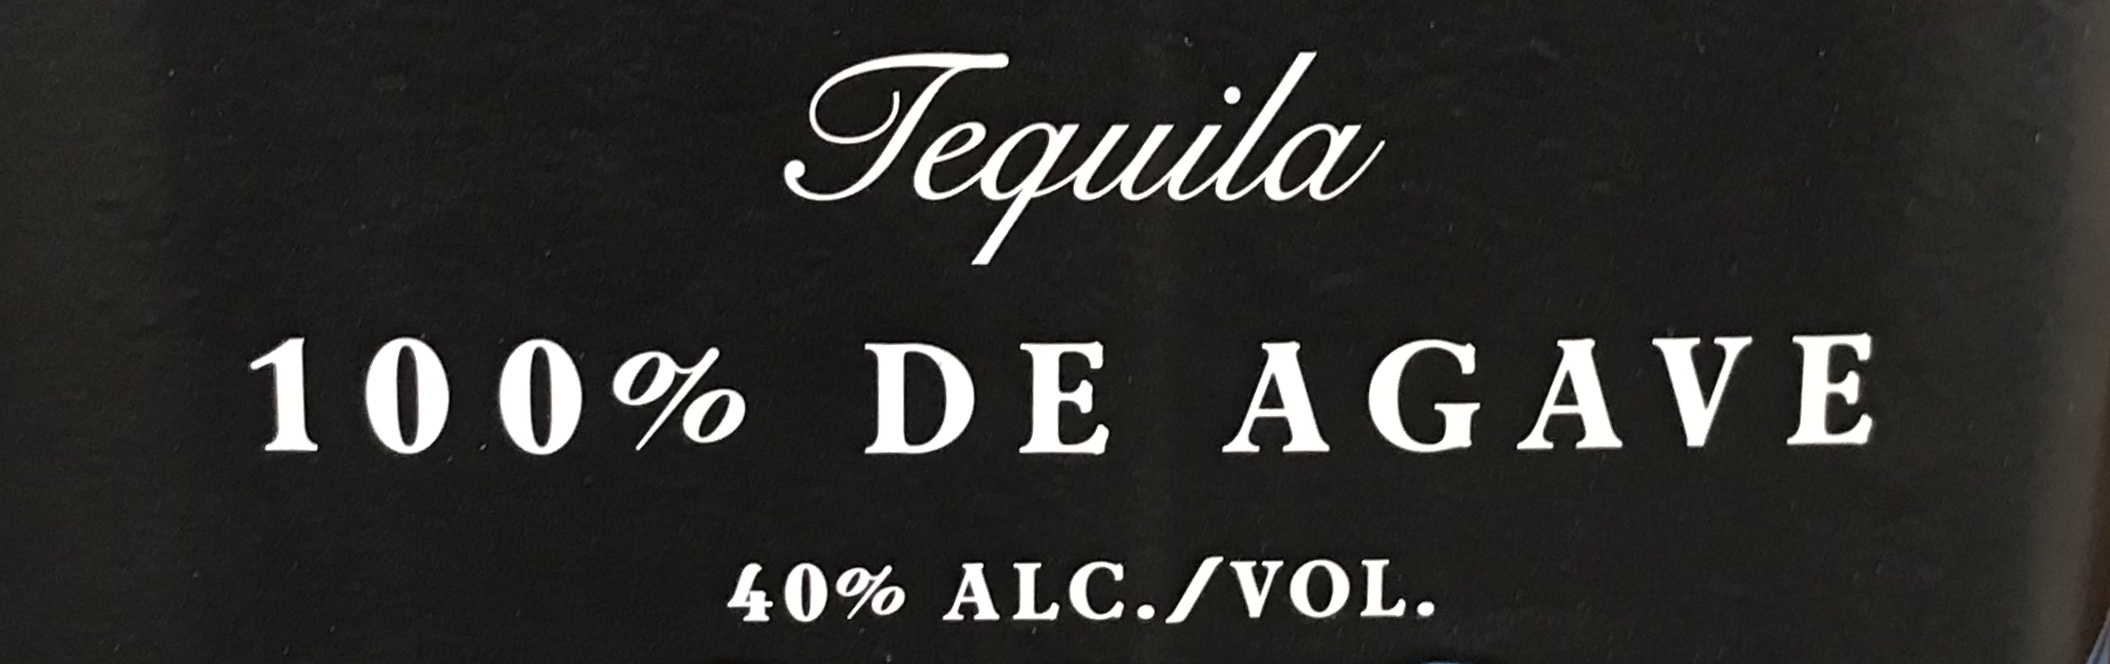 100% agave tequila label